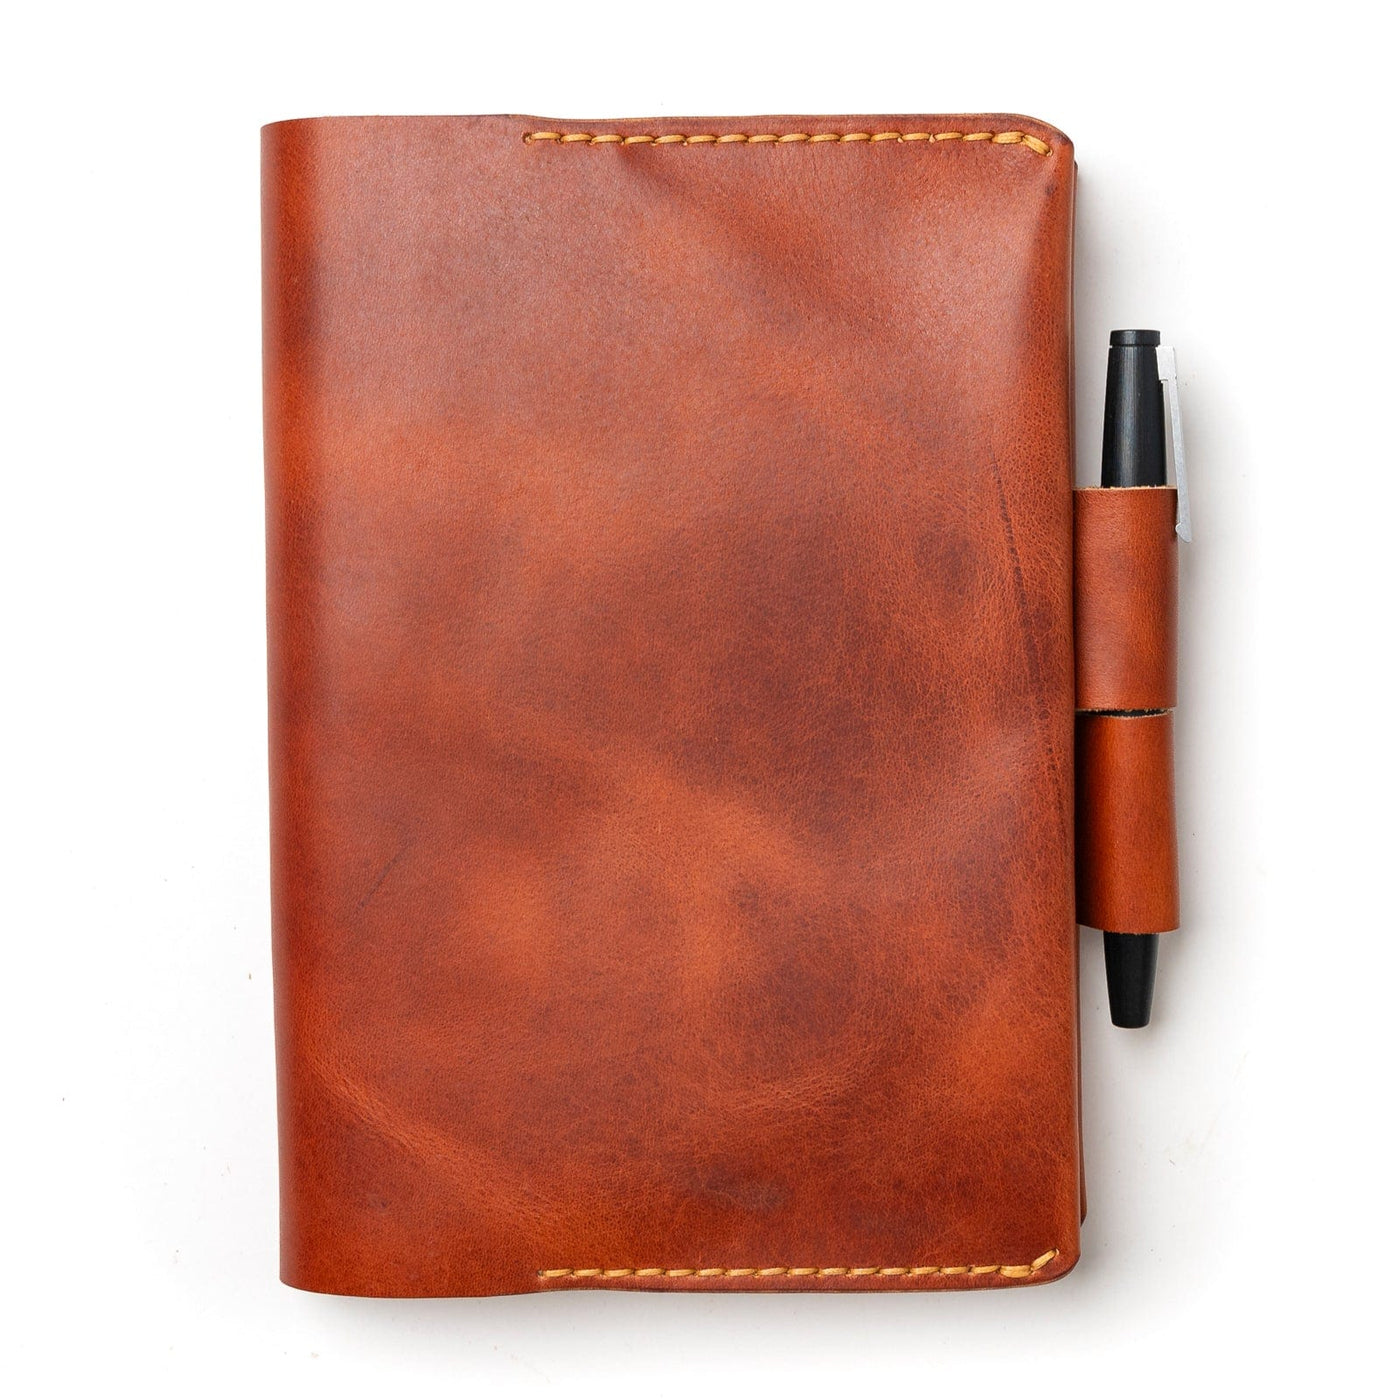 Leather Hobonichi Cousin A5 Notebook Cover - English Tan Popov Leather